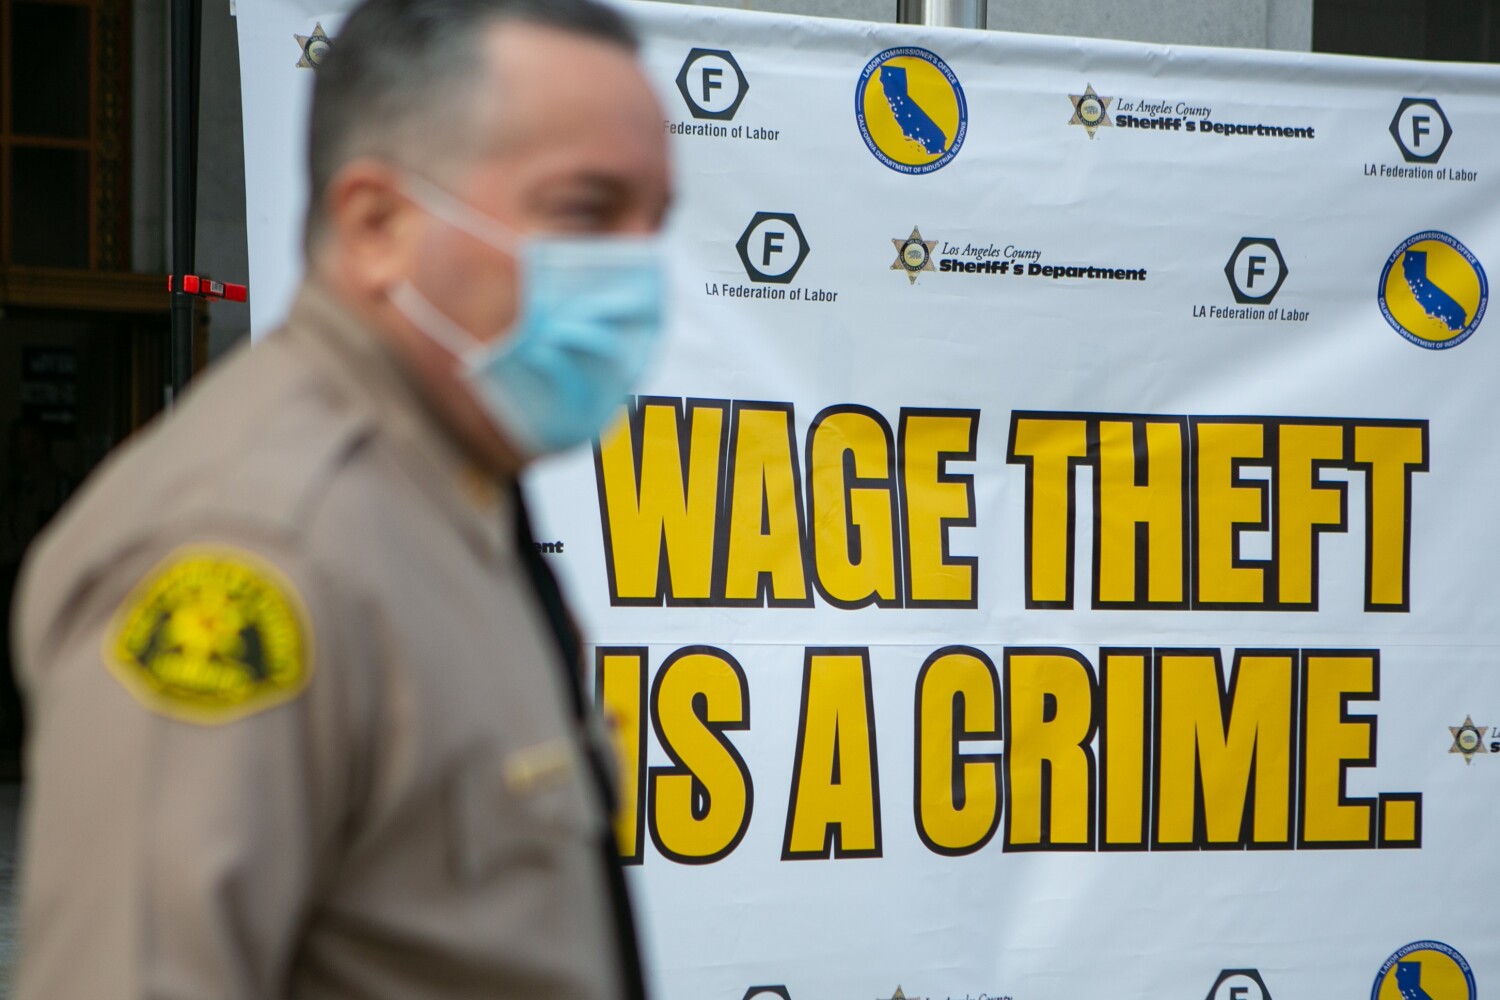 San Gabriel Valley poultry plant operators face 43 felony counts of wage theft, insurance fraud